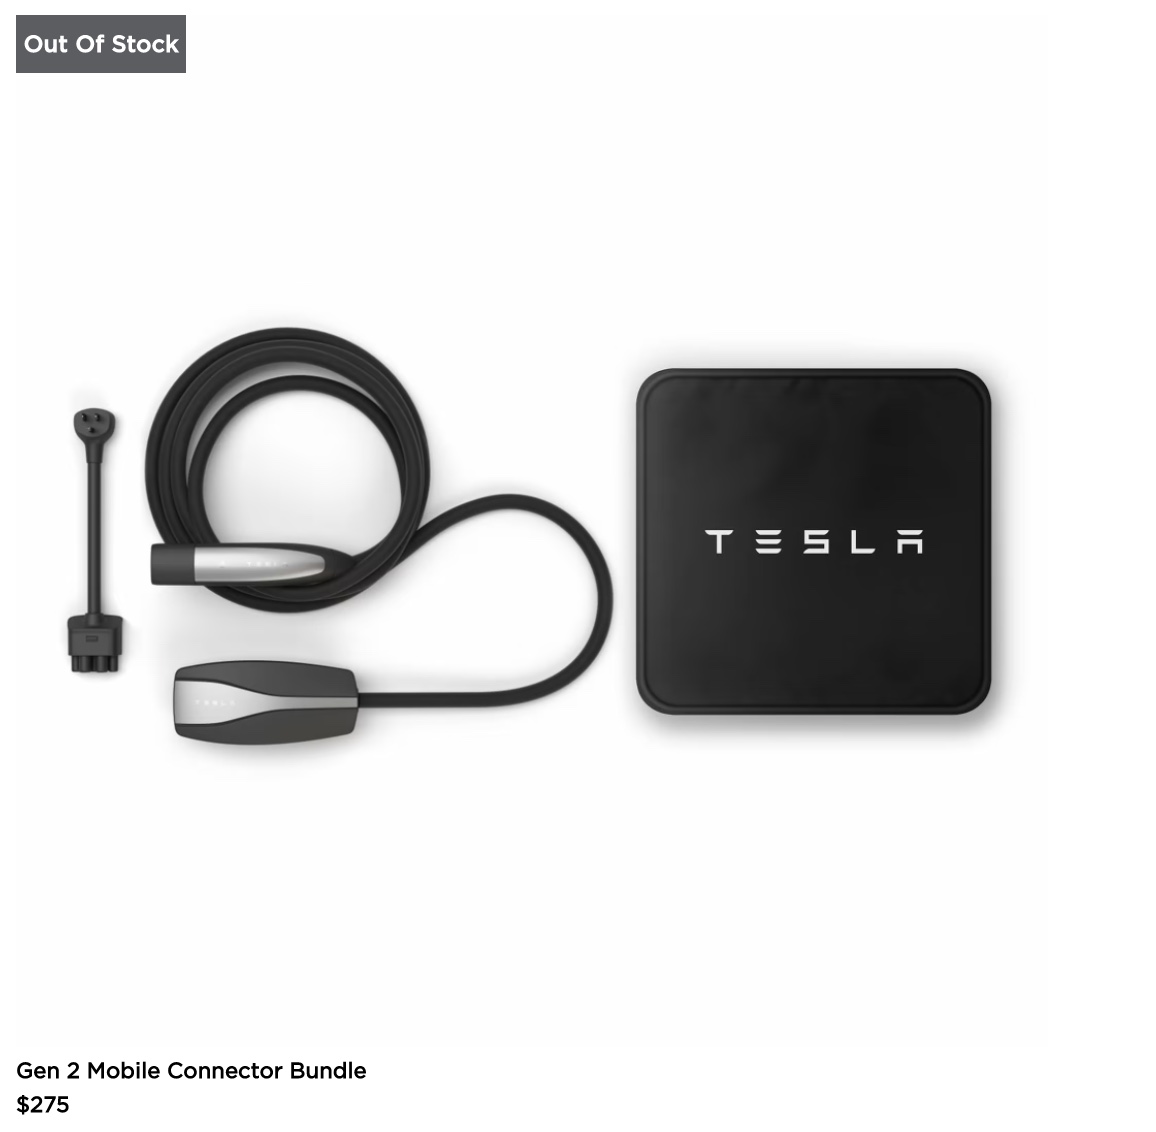 Tesla launches new charging adapter bundle to make sure you always